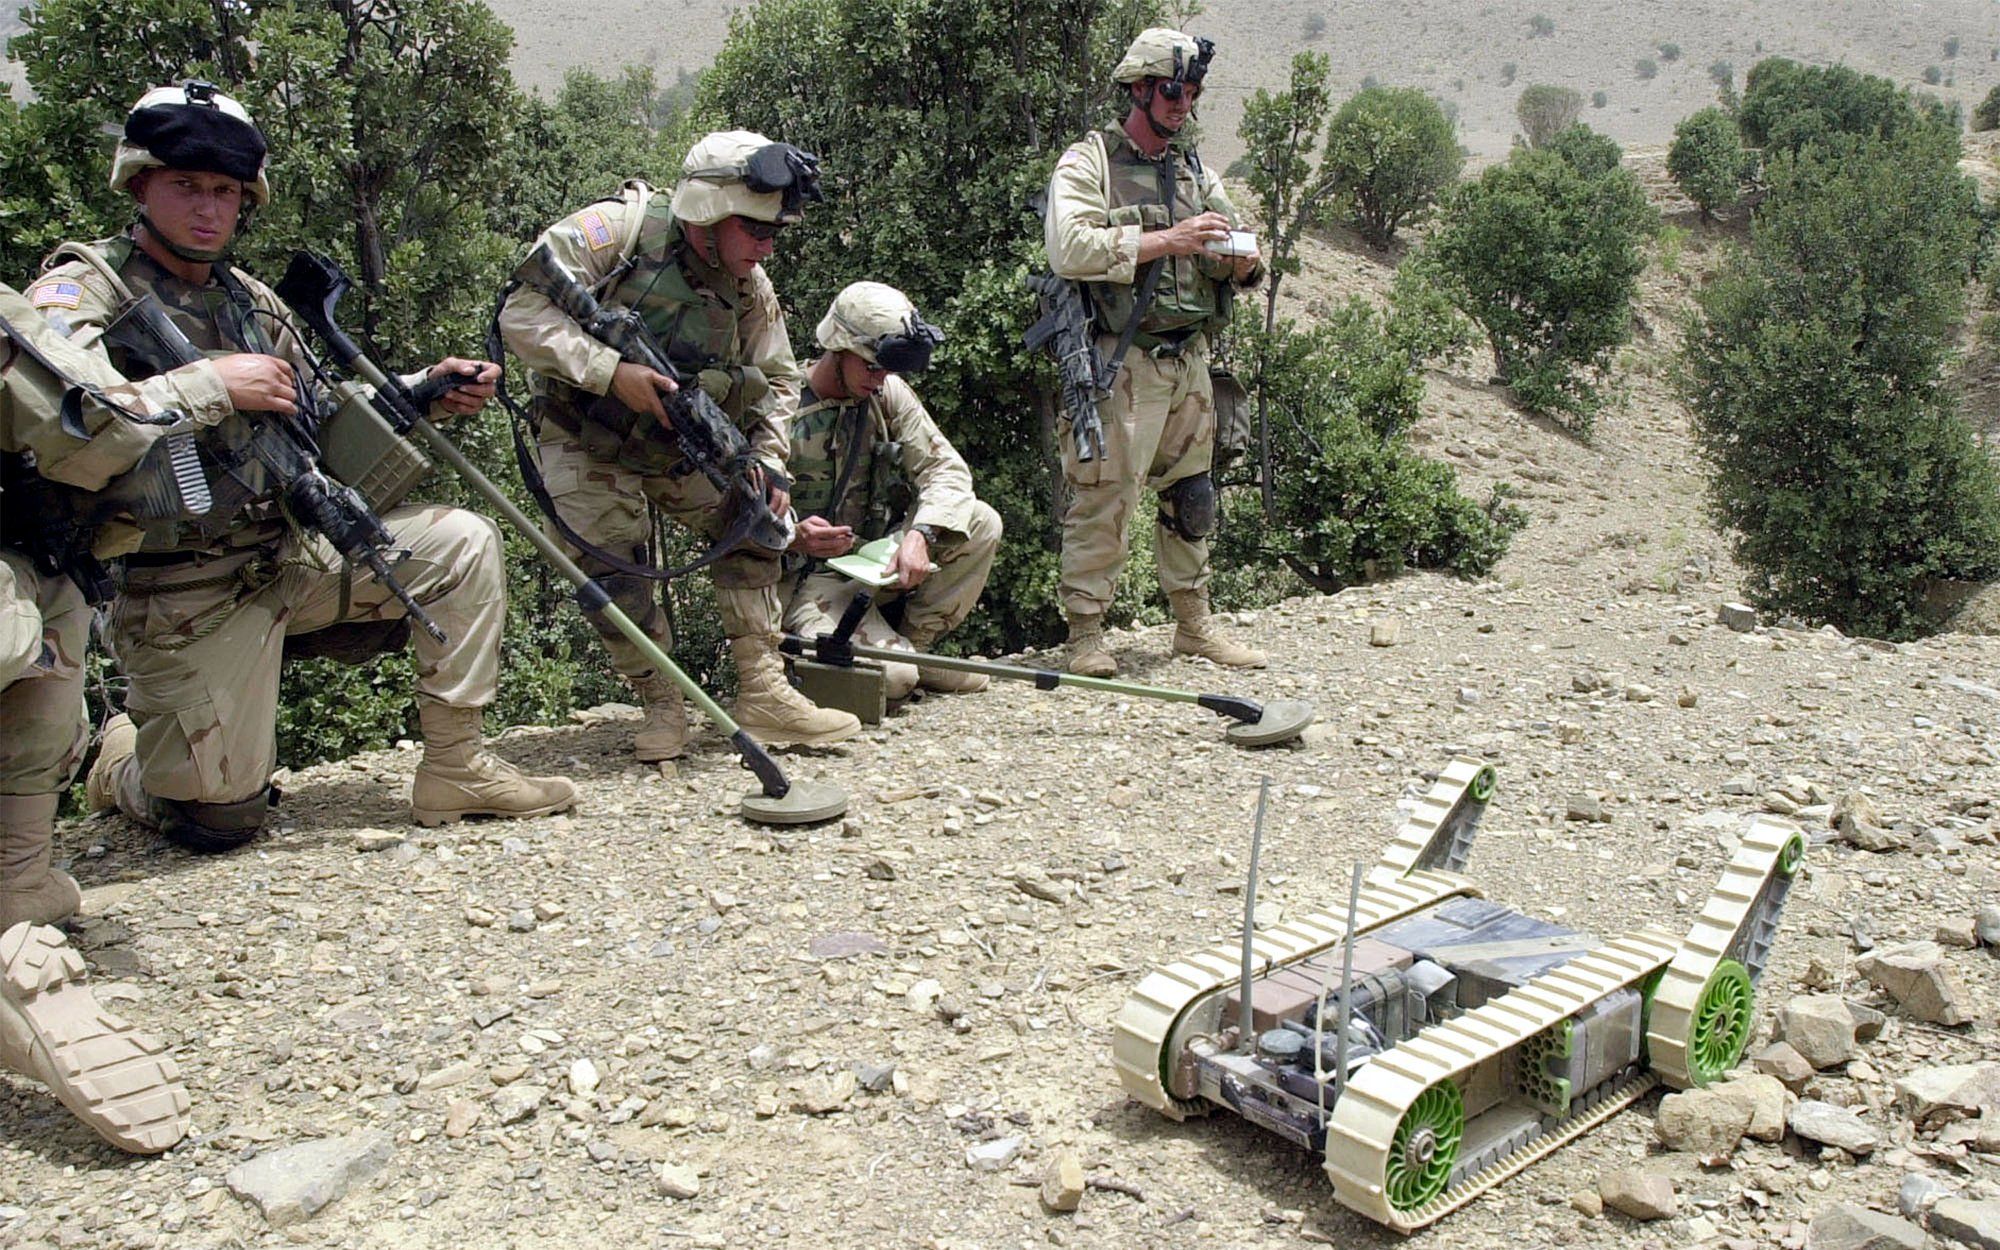 Four men wearing army fatigues and carrying weapons and tools look on as a small robot with treads rolls along the dusty ground.